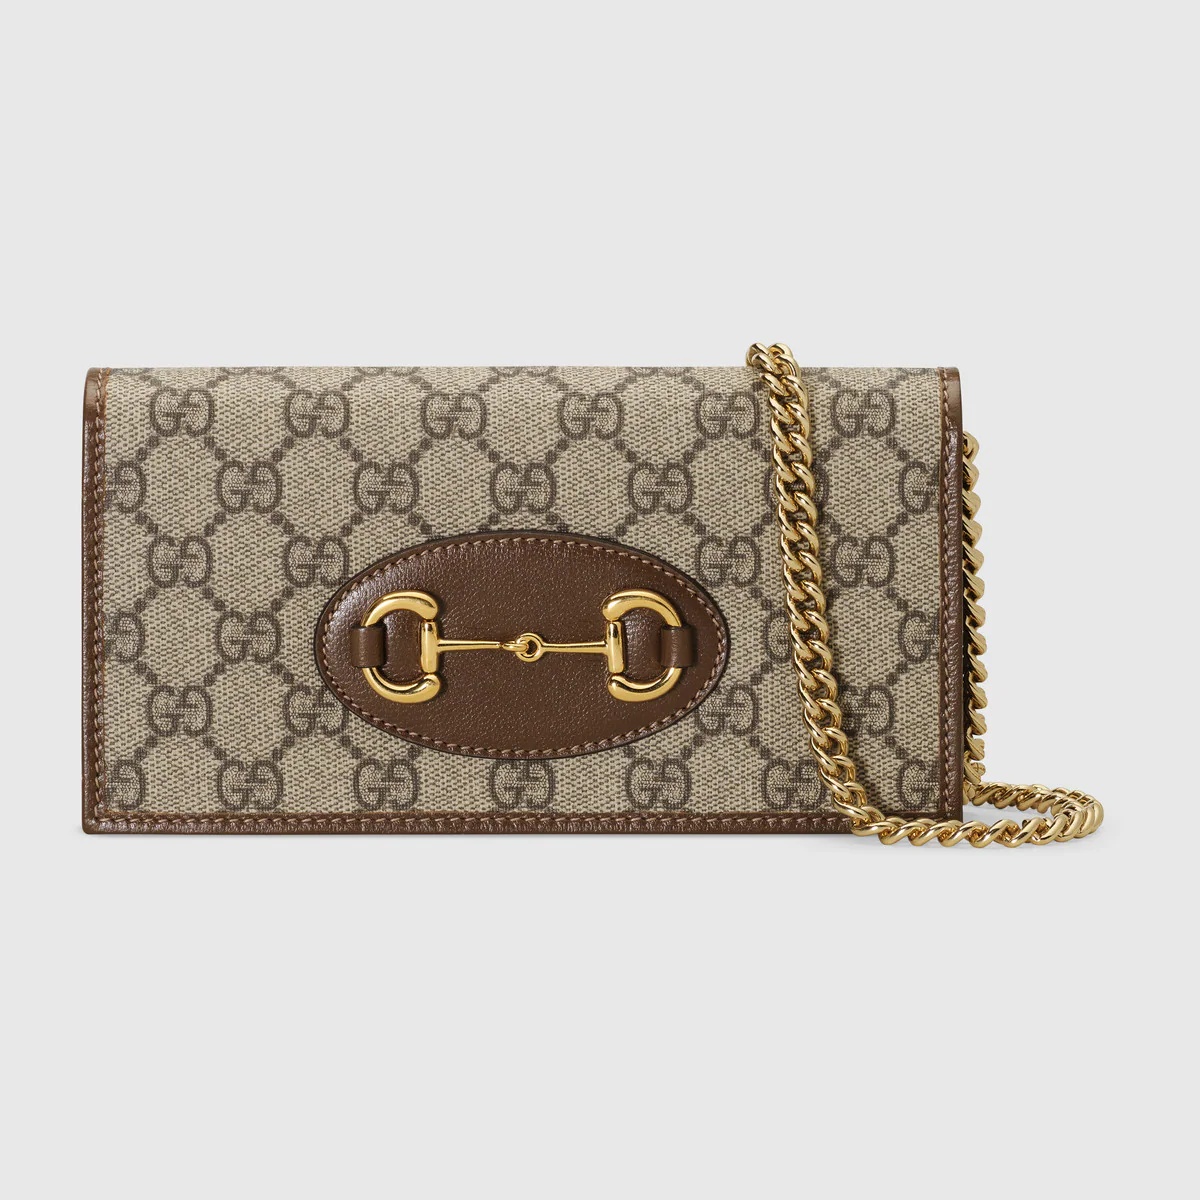 Gucci Horsebit 1955 wallet with chain - 1